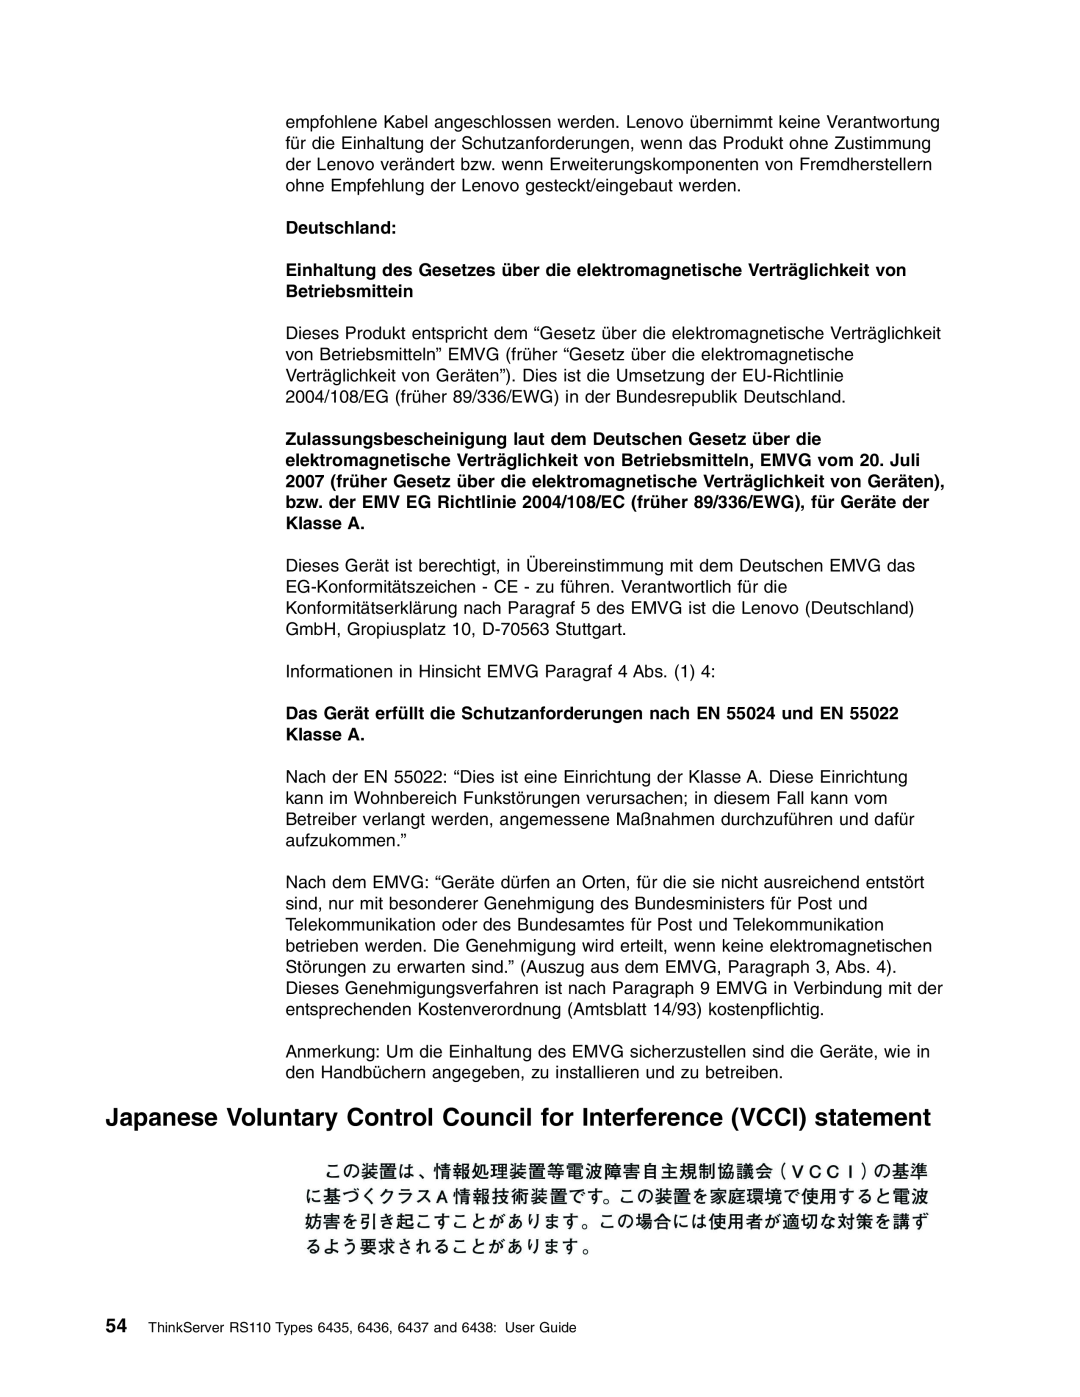 Lenovo 6438 Japanese Voluntary Control Council for Interference VCCI statement, Deutschland, Betriebsmittein, Klasse A 